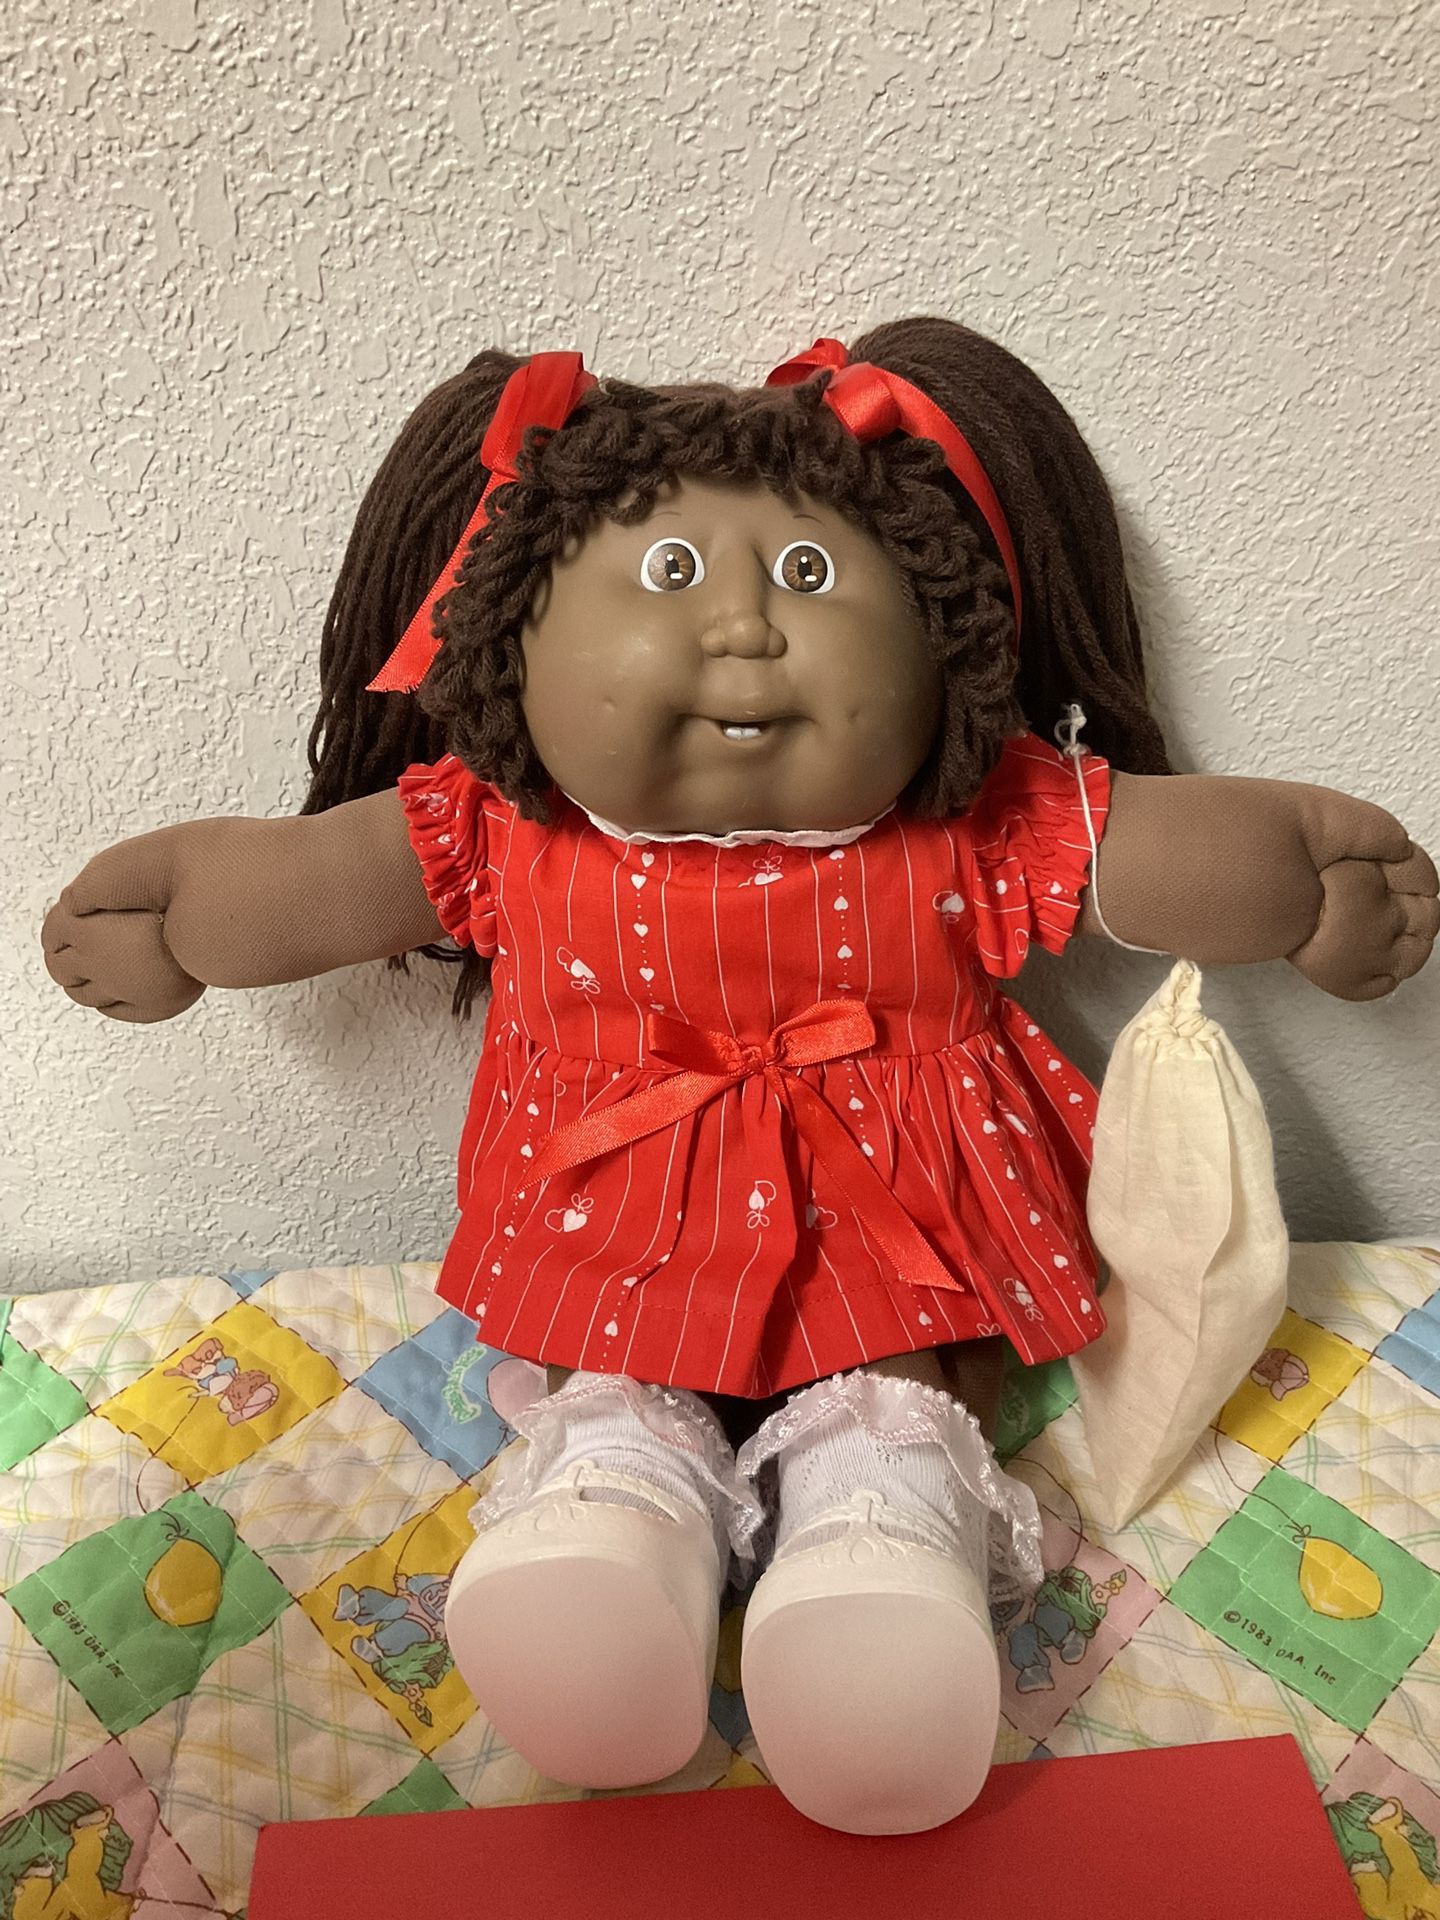 RARE Vintage Cabbage Patch Kid Girl African American Head Mold #10 Two Teeth 1987